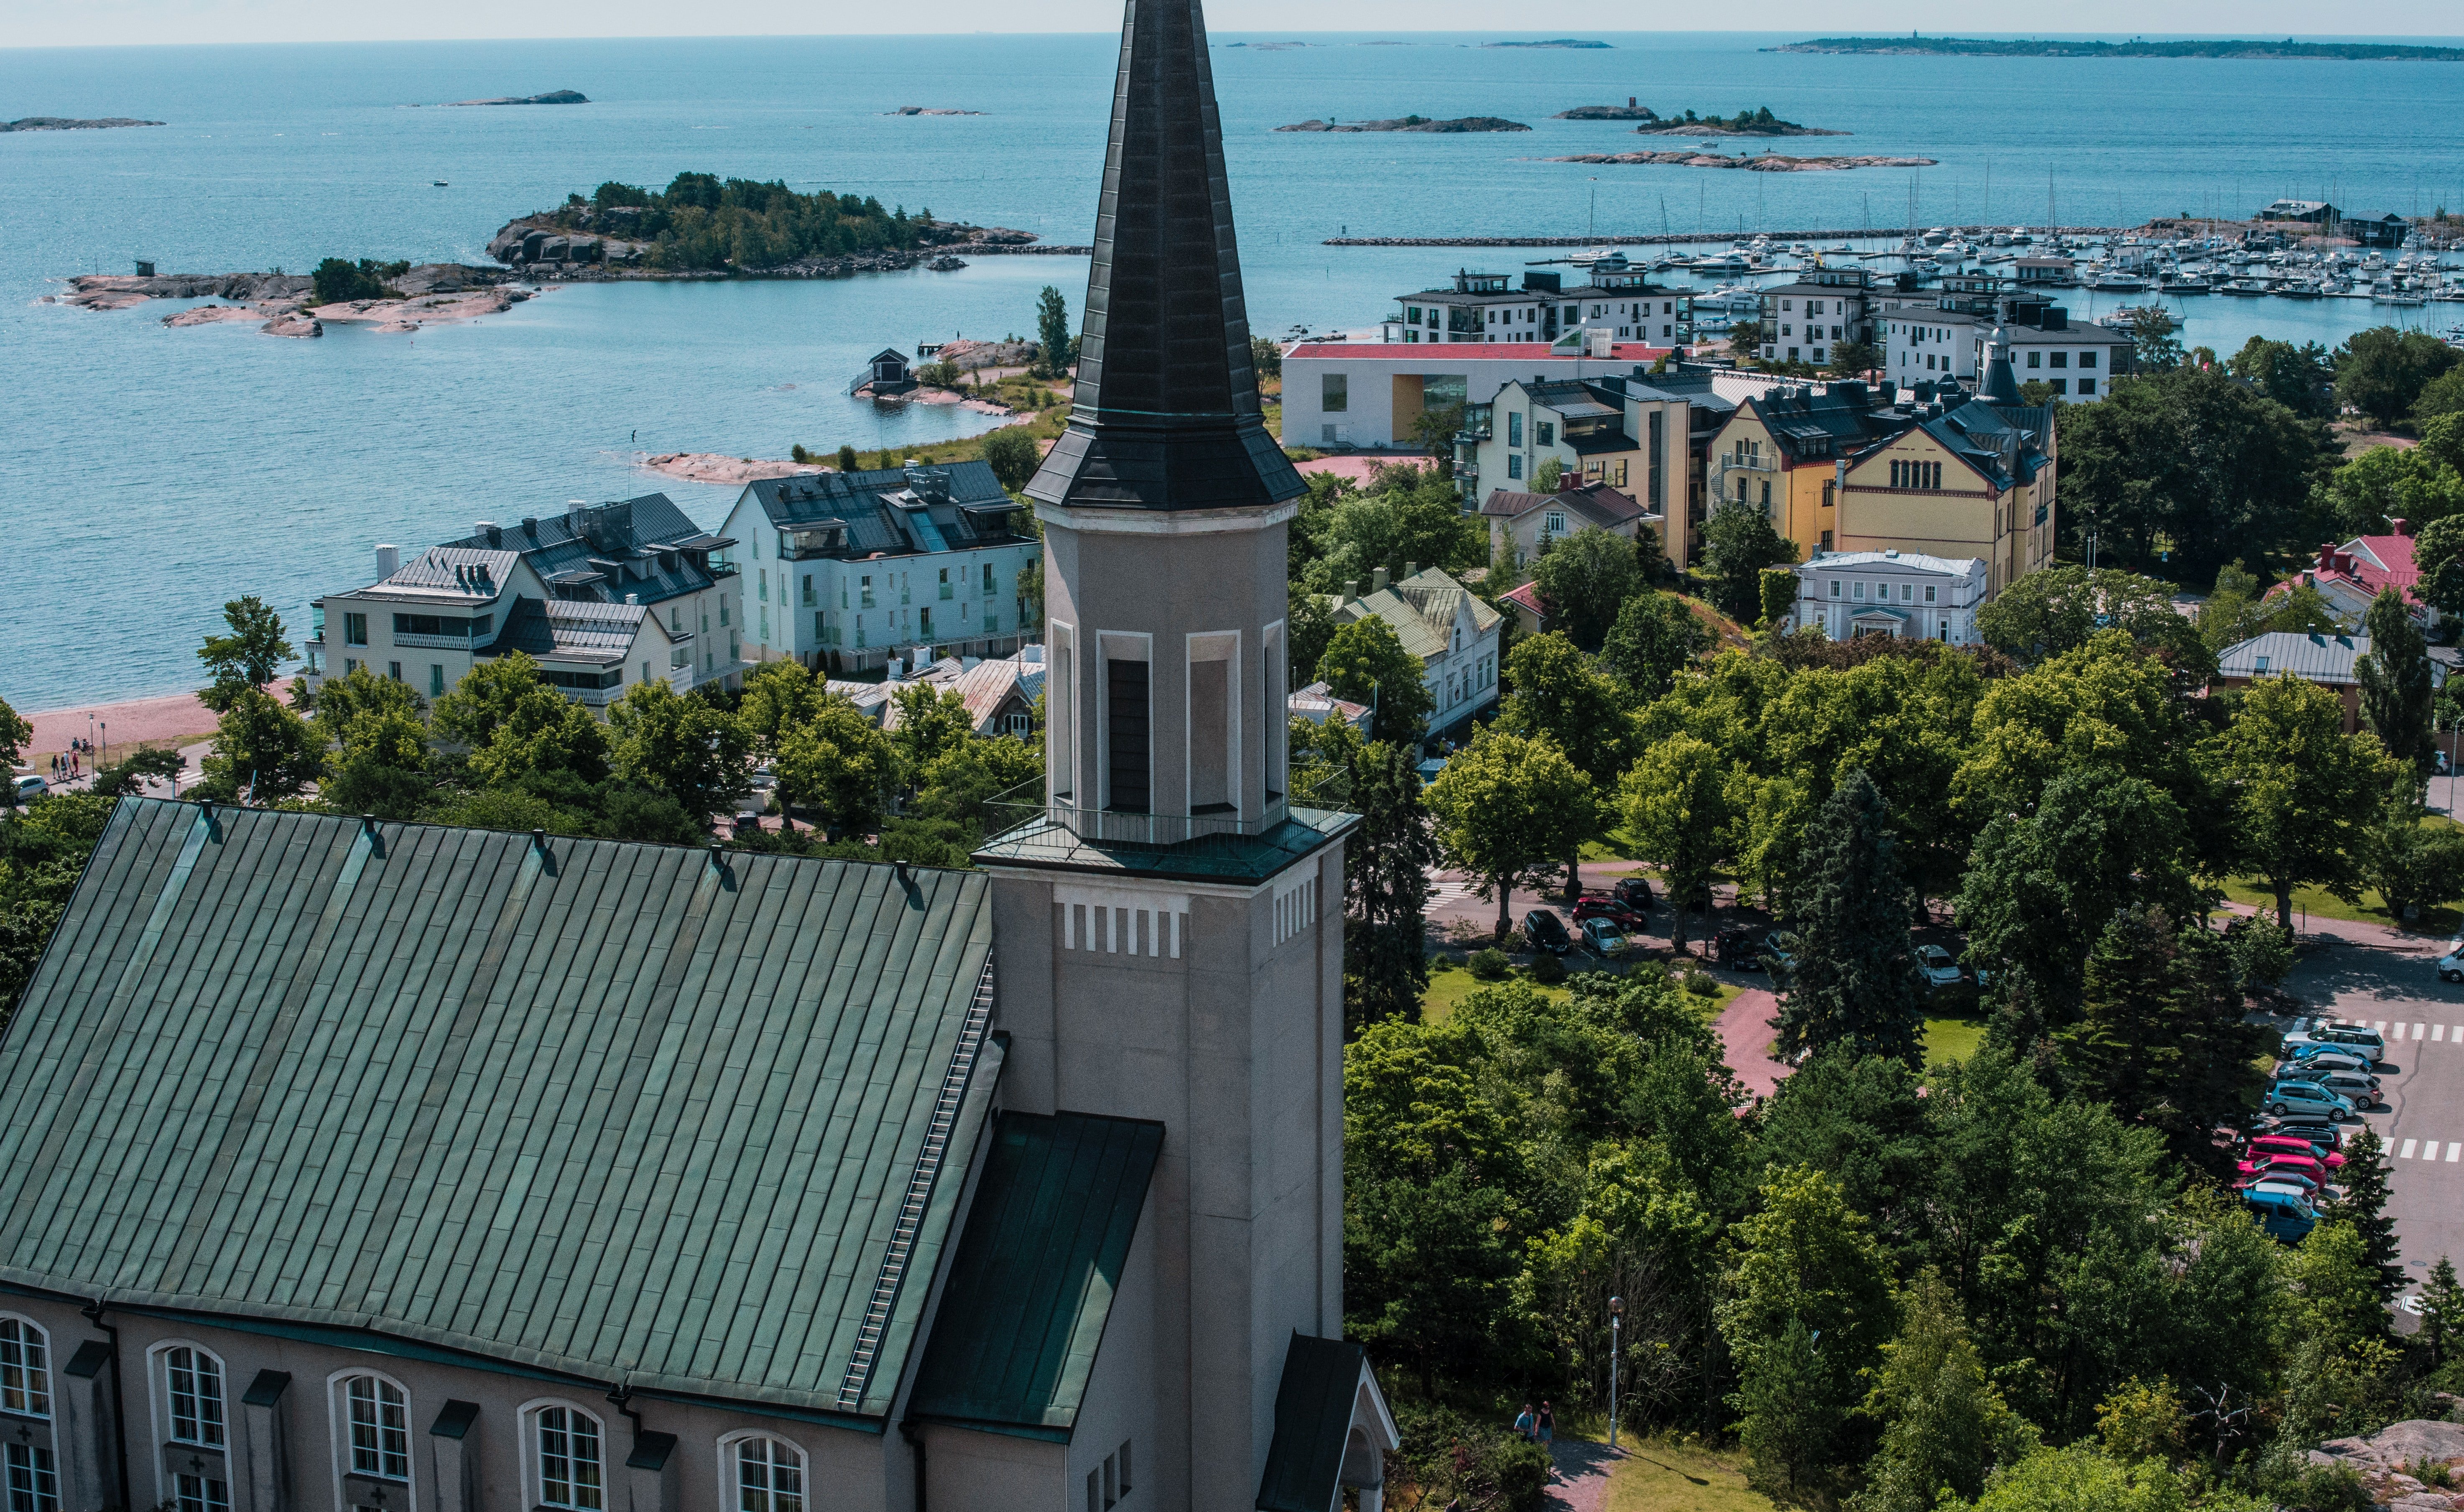 A view of Hanko, Finland with houses by the sea. Scandinavia road trips